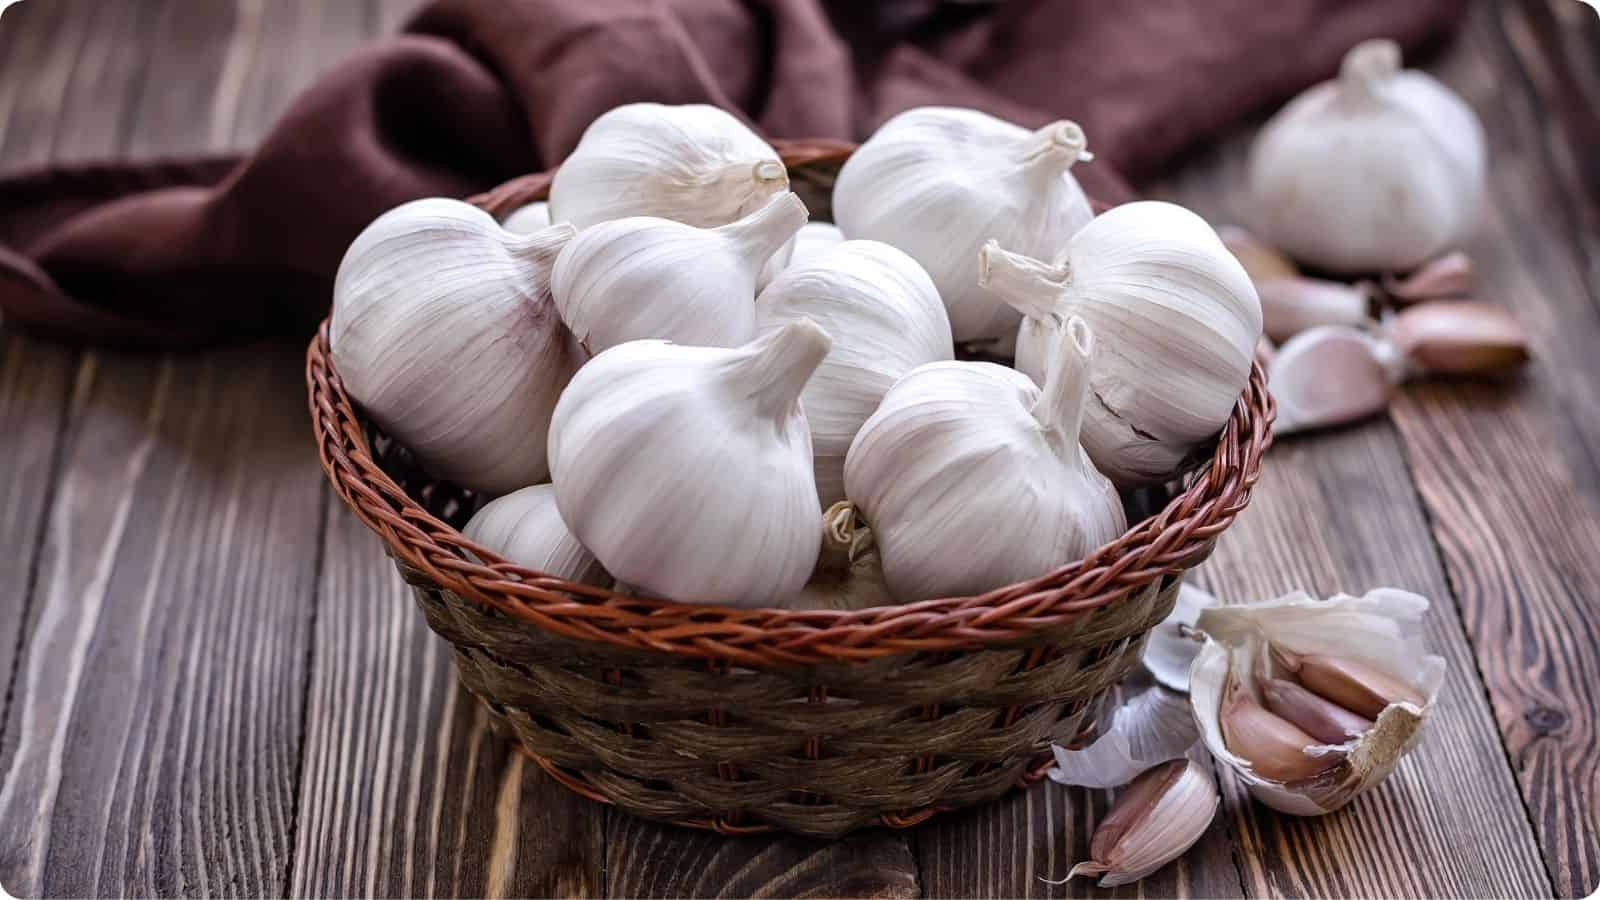 A basket filled with fresh bulbs of garlic, resting on a wooden tabletop.